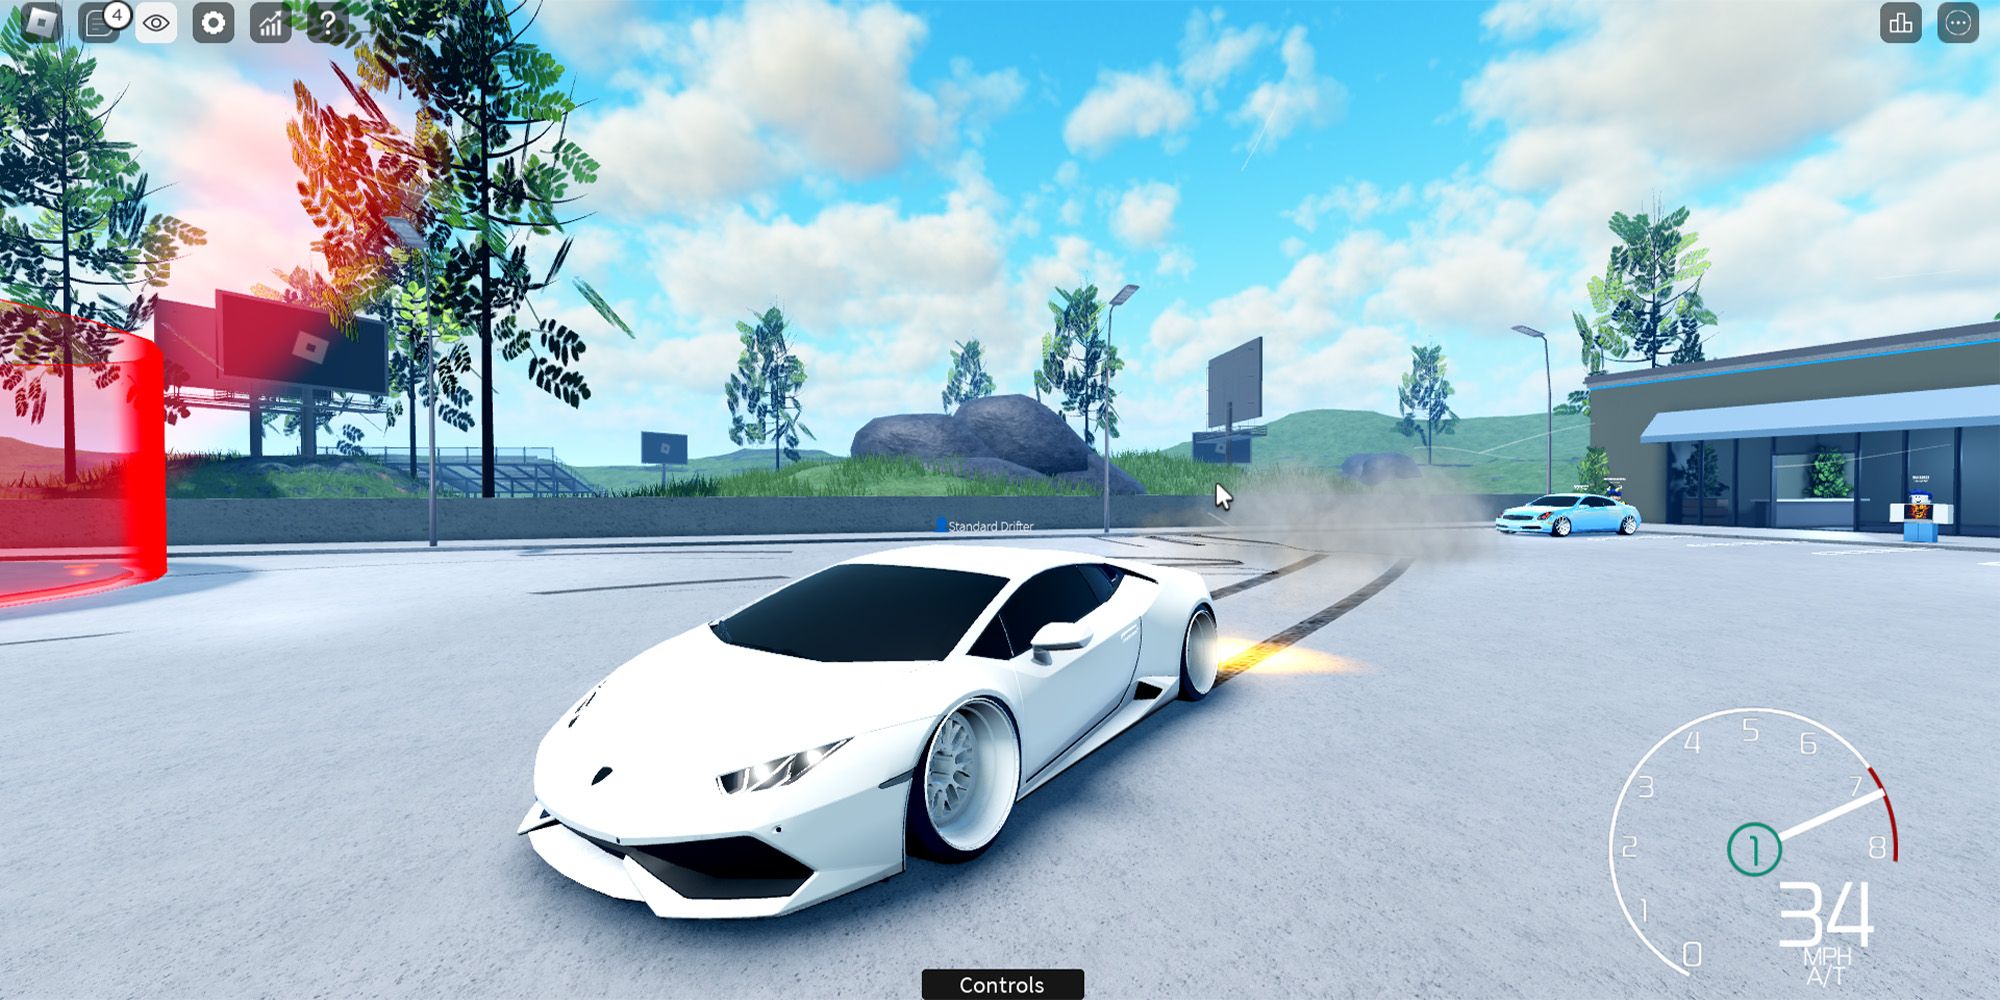 A white sports car leaves skid marks behind it while drifting in a parking lot in Drift Paradise.